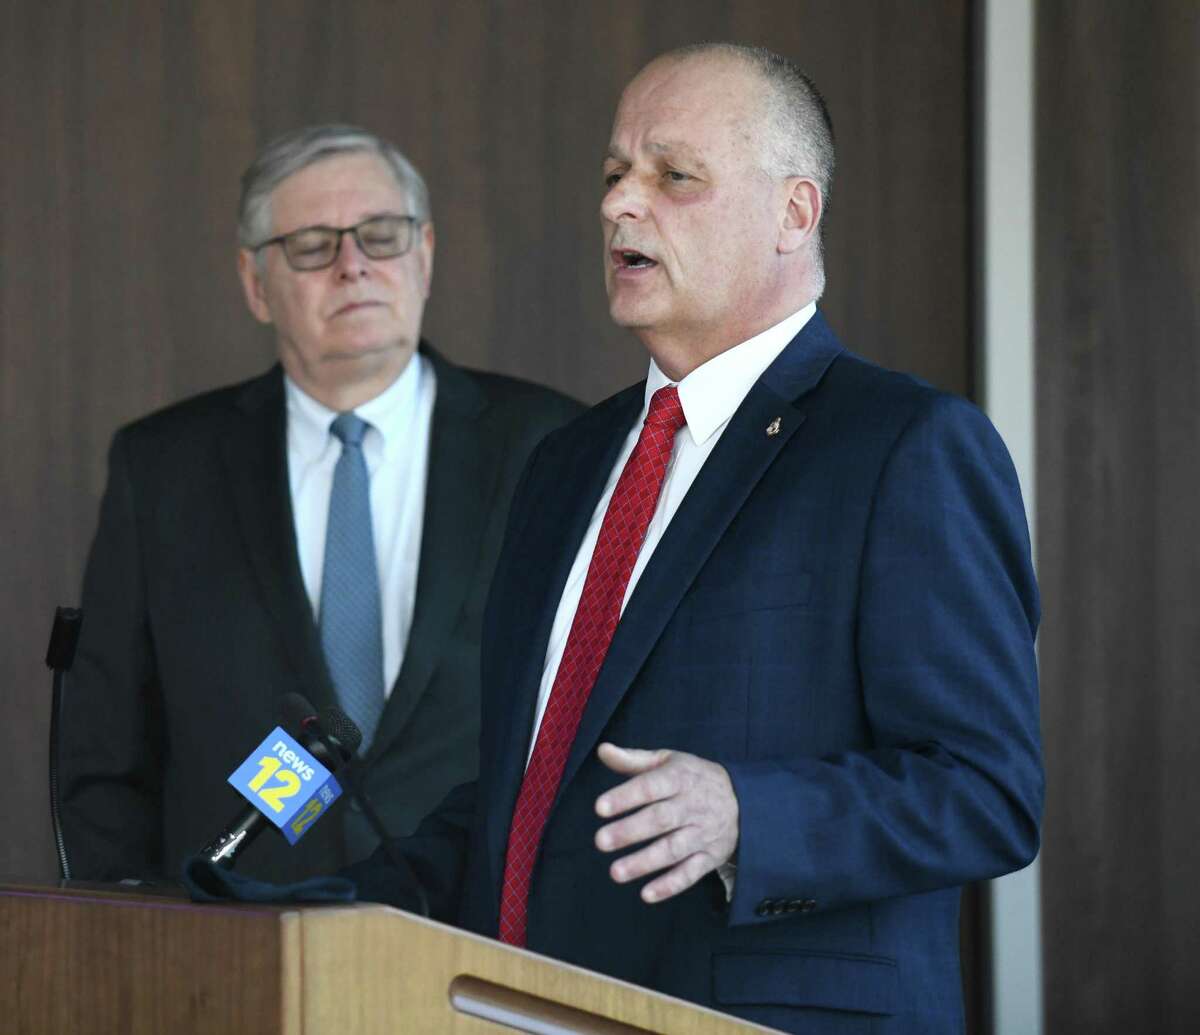 Stamford Director of Public Safety Ted Jankowski, right, speaks beside then-Mayor David Martin about mental health initiatives in policing at the Stamford Police Department in Stamford, Conn., on May 12, 2021.